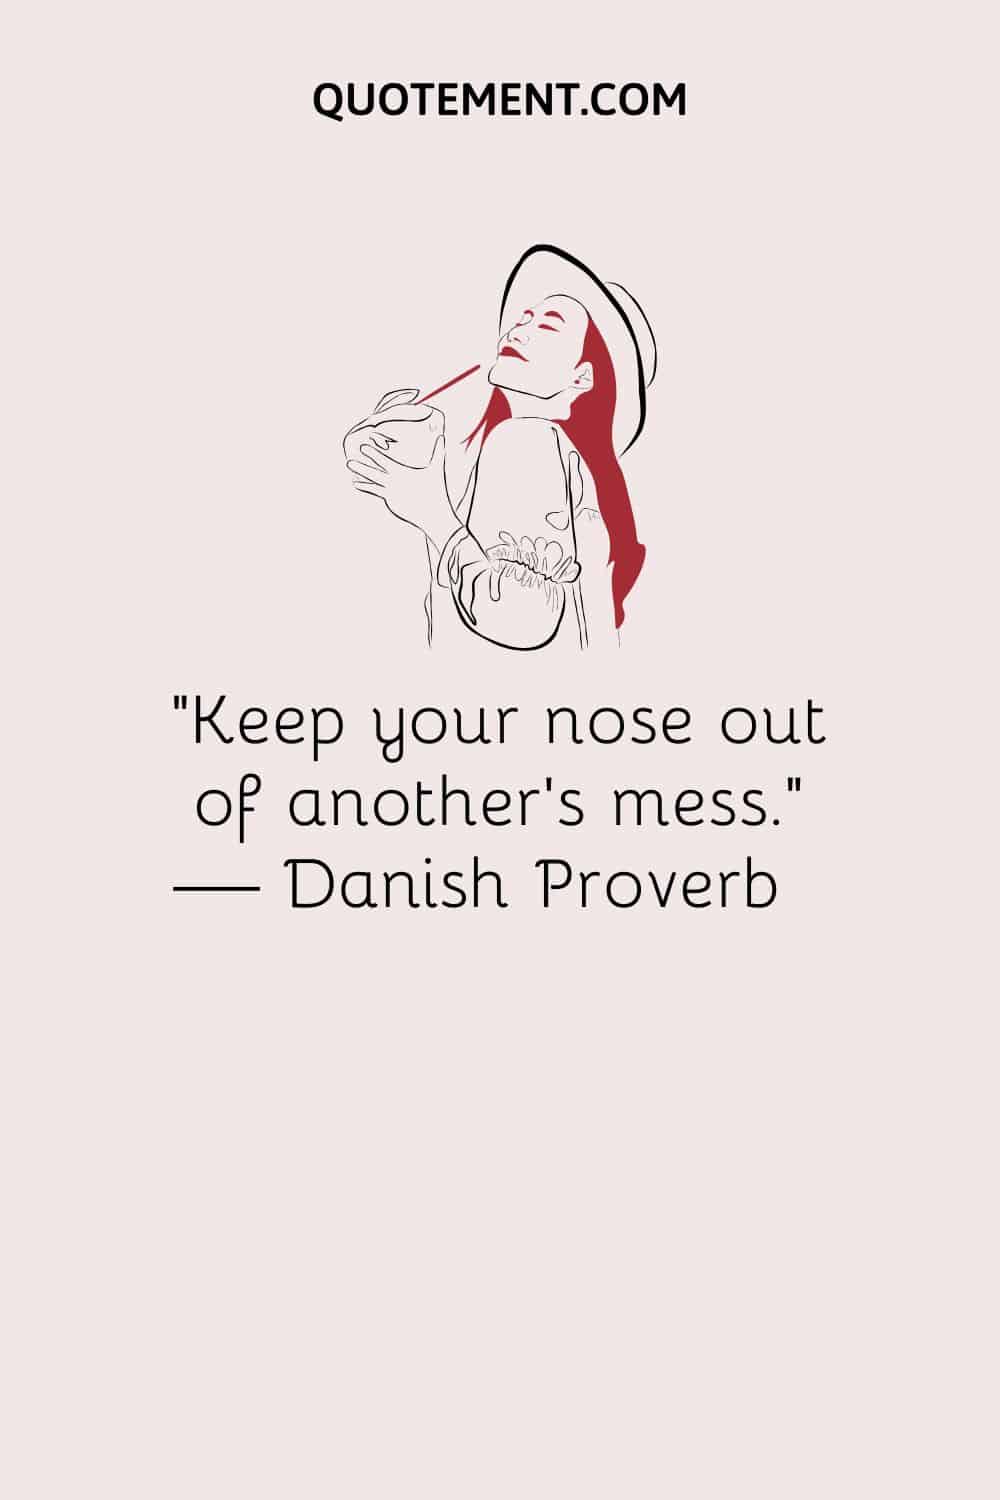 Keep your nose out of another’s mess